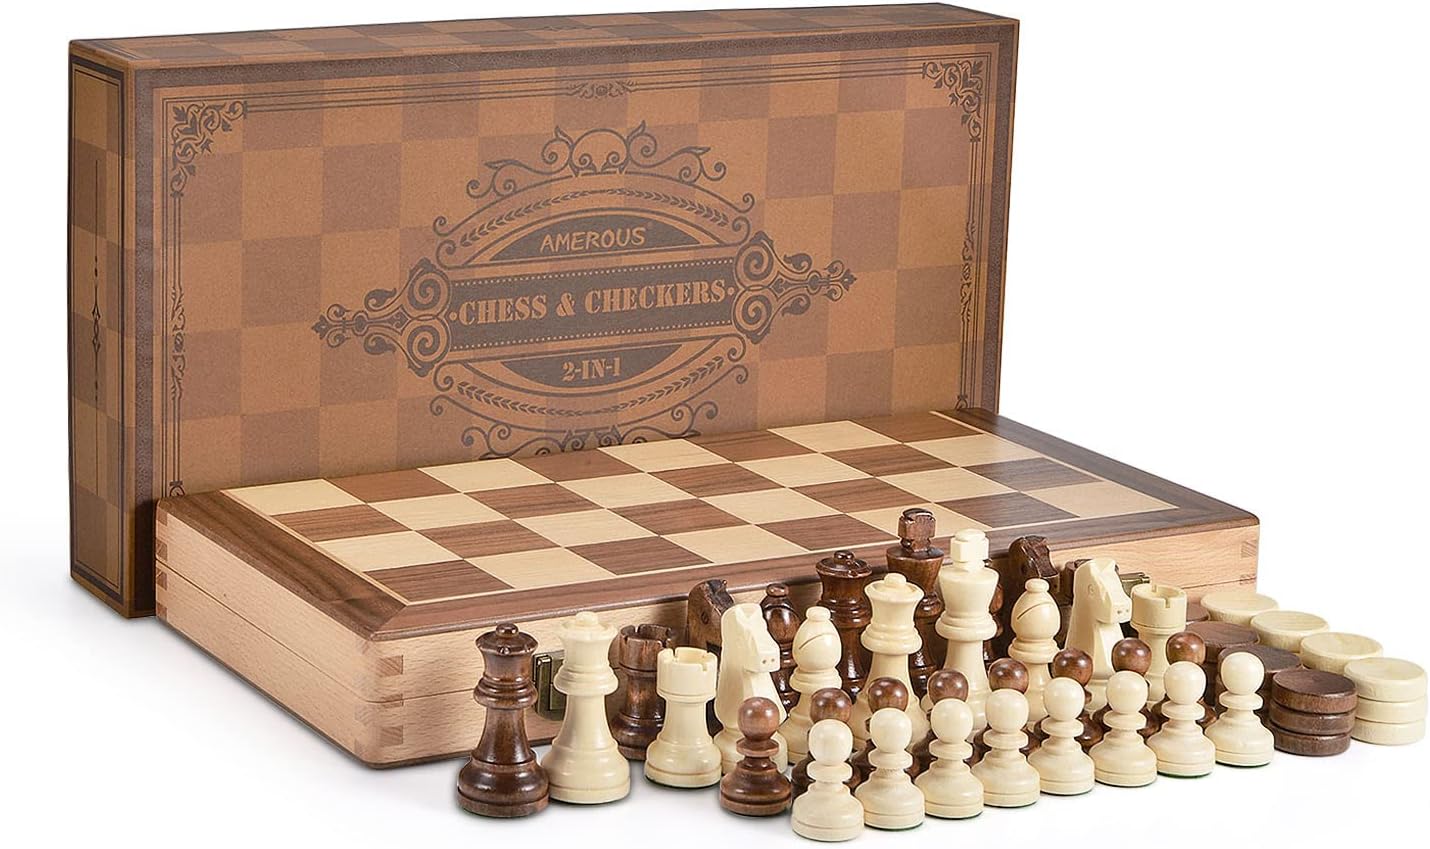 15 Inches Wooden Chess & Checkers Set with Upgraded Weighted Chess Pieces - 2 Extra Queen -24 Cherkers Pieces -Instruction -Chessmen Storage Slots, Classic 2 in 1 Board Games